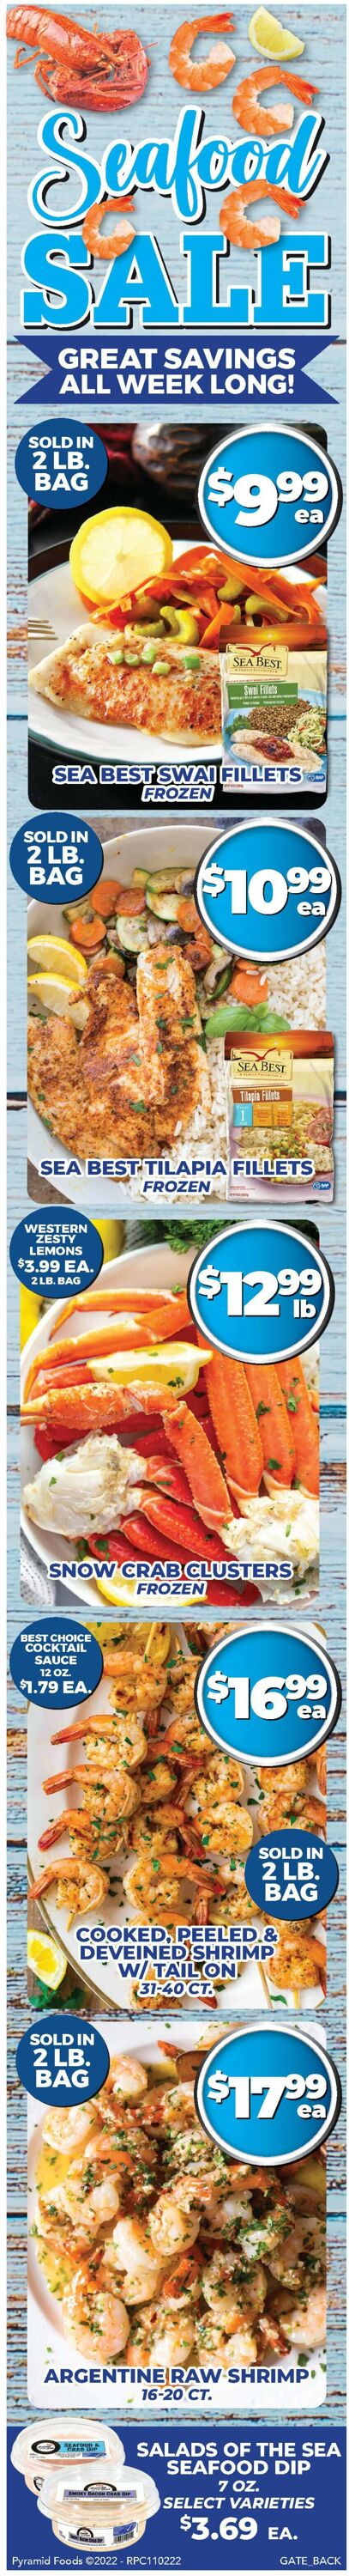 Price Cutter Weekly Ad Circular - valid 11/02-11/08/2022 (Page 4)